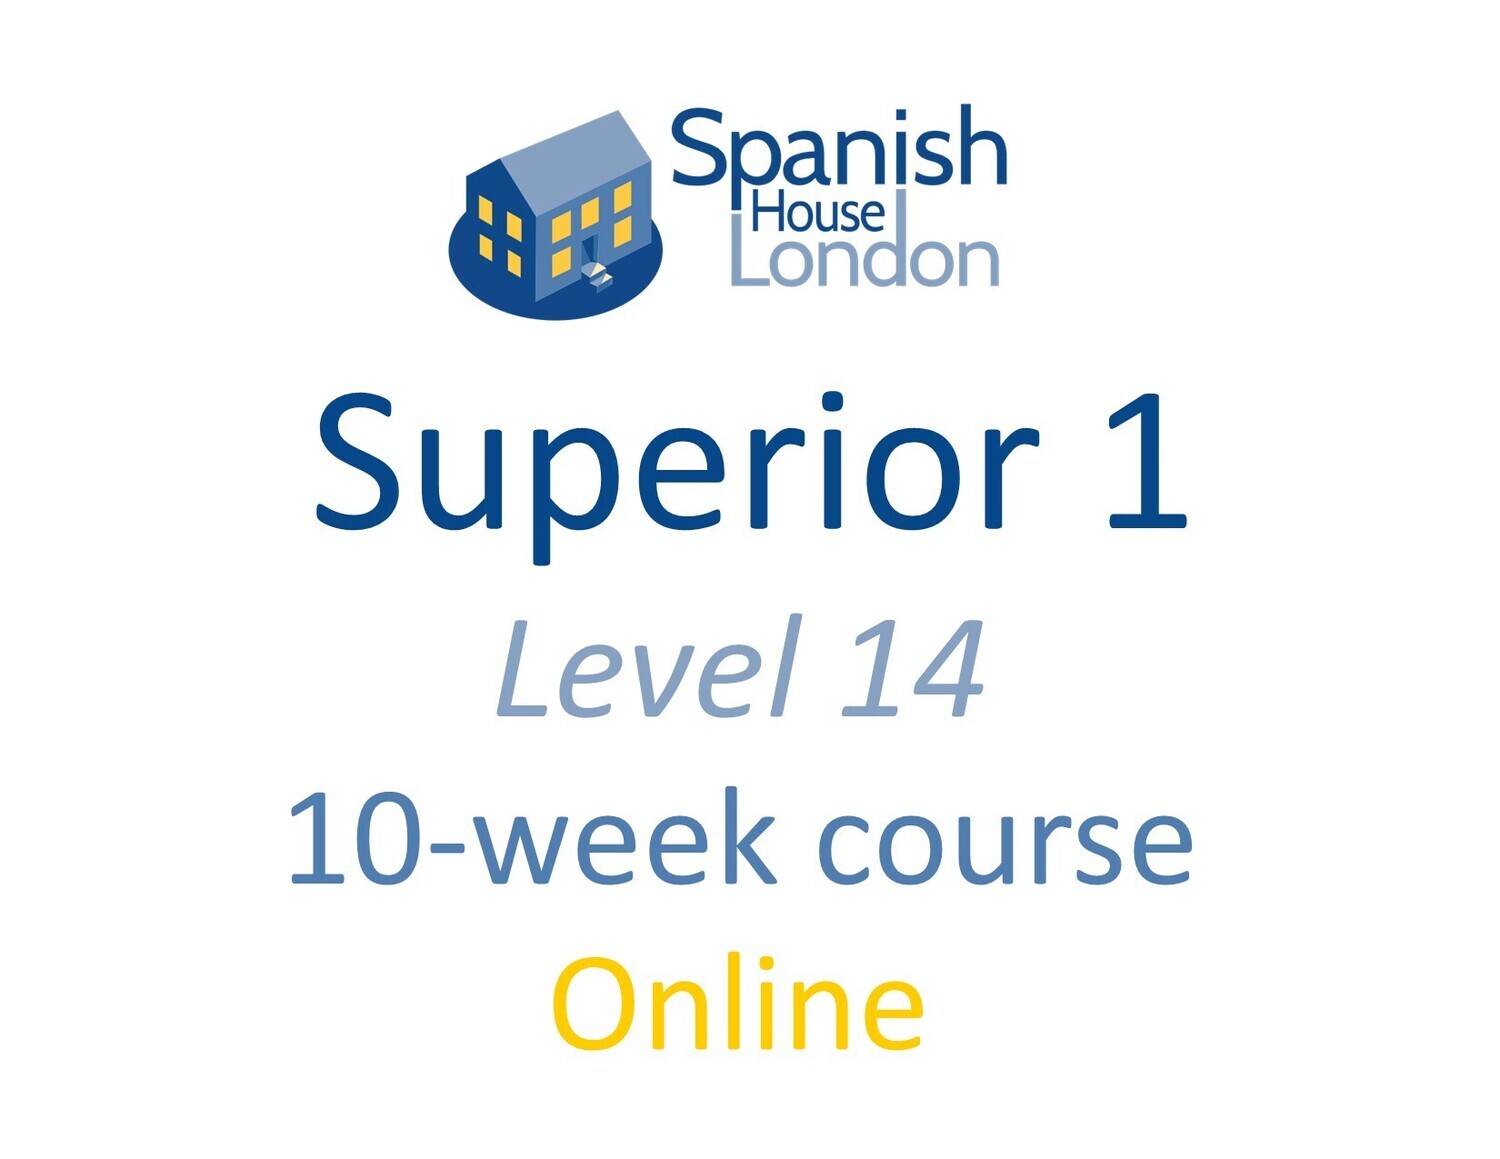 Superior 1 Course starting on 11th October at 7.30pm Online